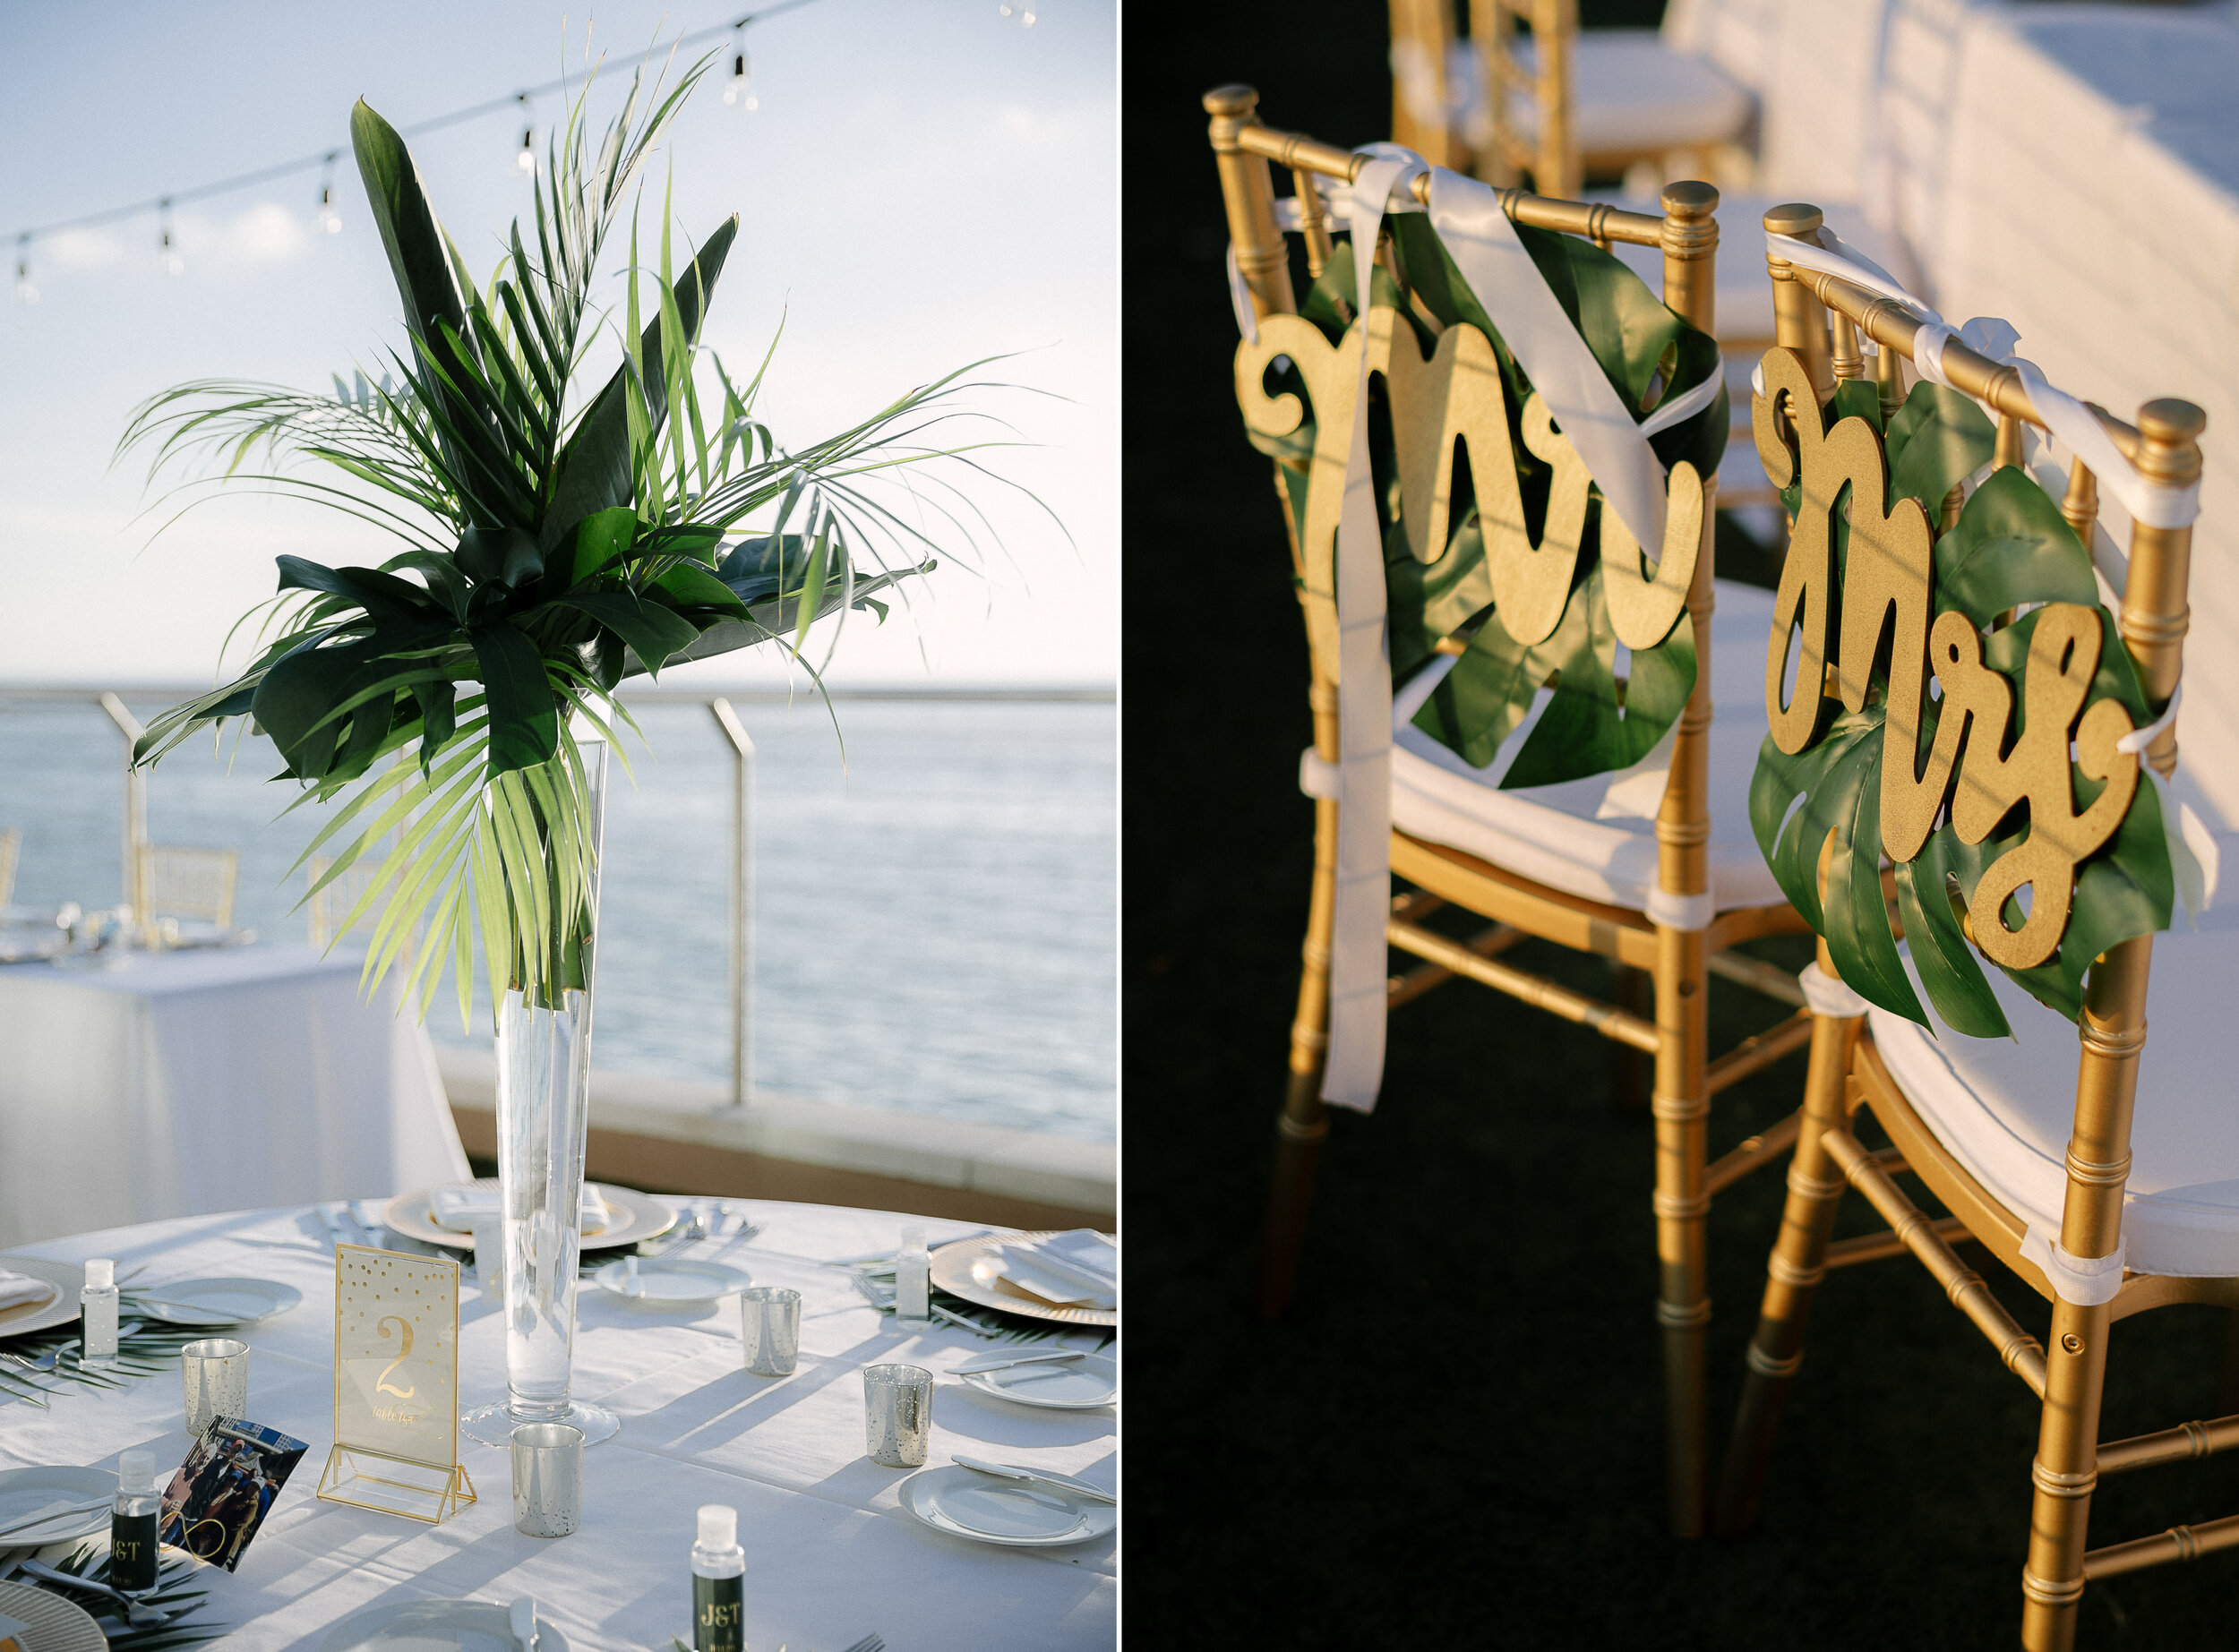 Sunglow Photography Clearwater Beach Wedding, FL at Opal Sands a